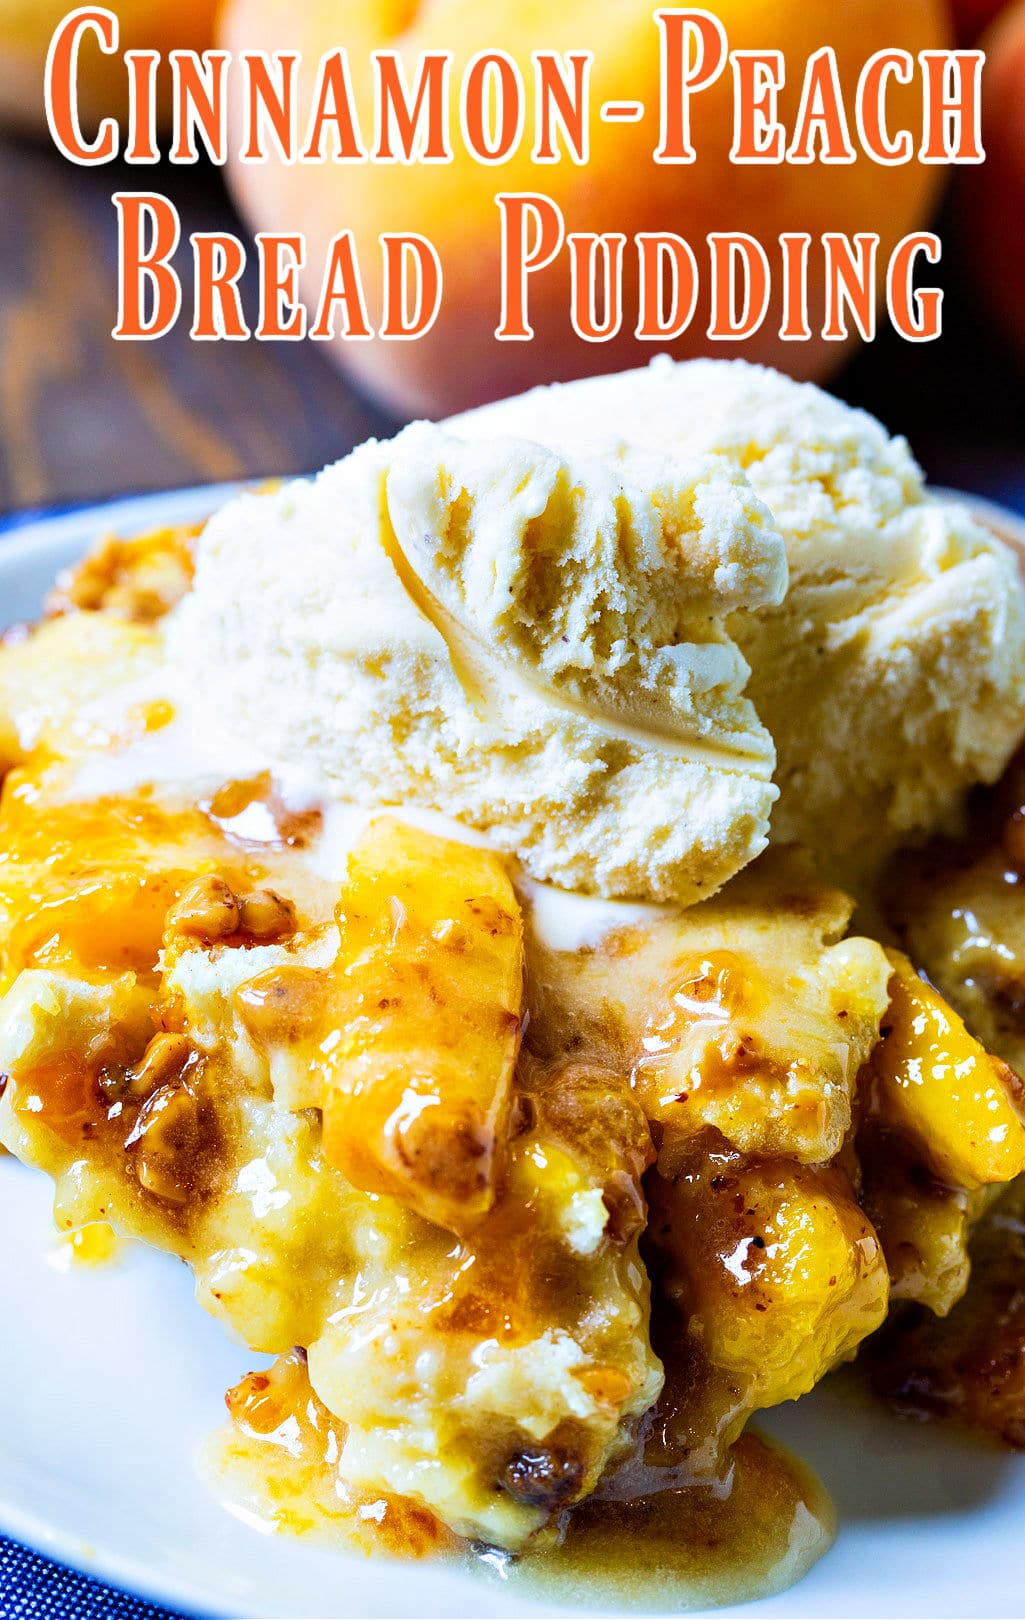 Piece of bread pudding topped with vanilla ice cream.